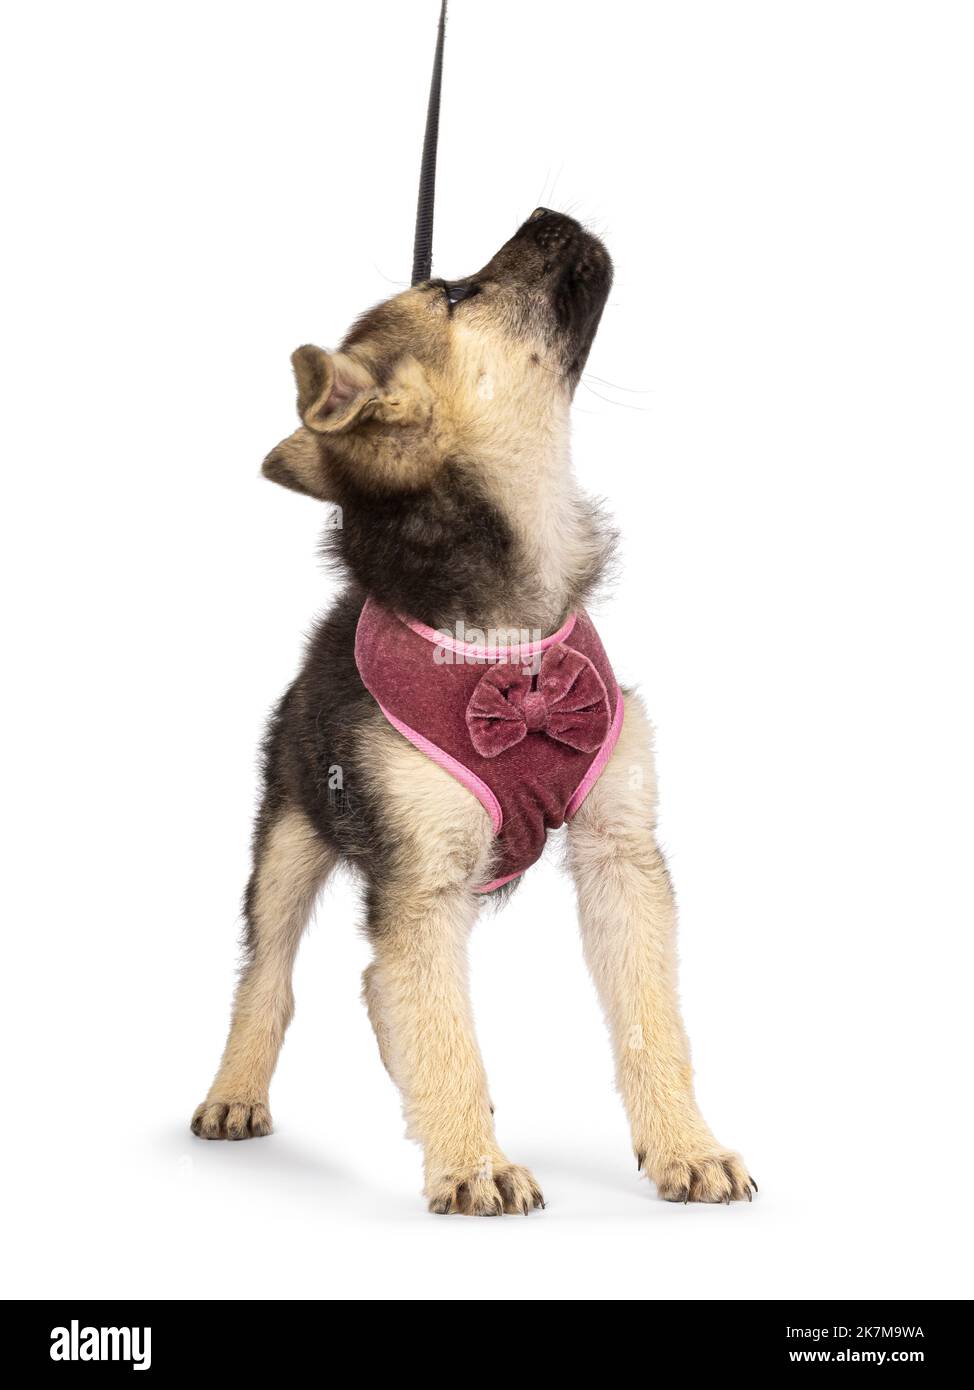 Adorable brown with black mixed Mudi and Germand Shepherd dog puppy, wearing harness on leash. Standing up facing front. Looking up to owner boss and Stock Photo